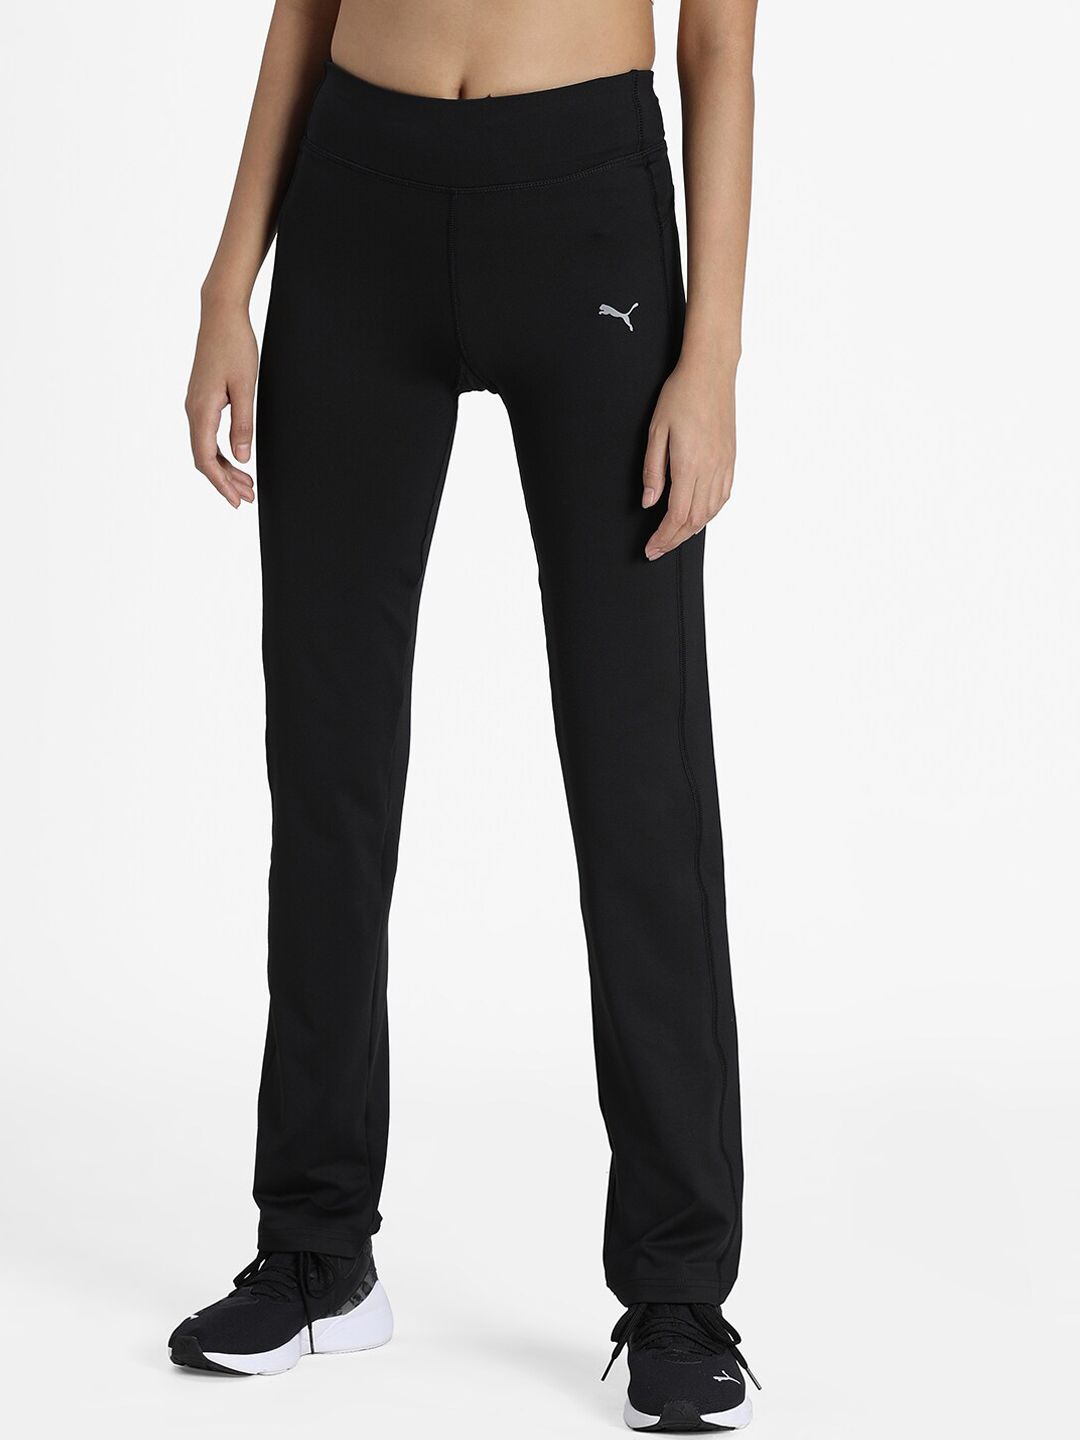 Puma Women Black Solid Straight Fit Track Pants Price in India